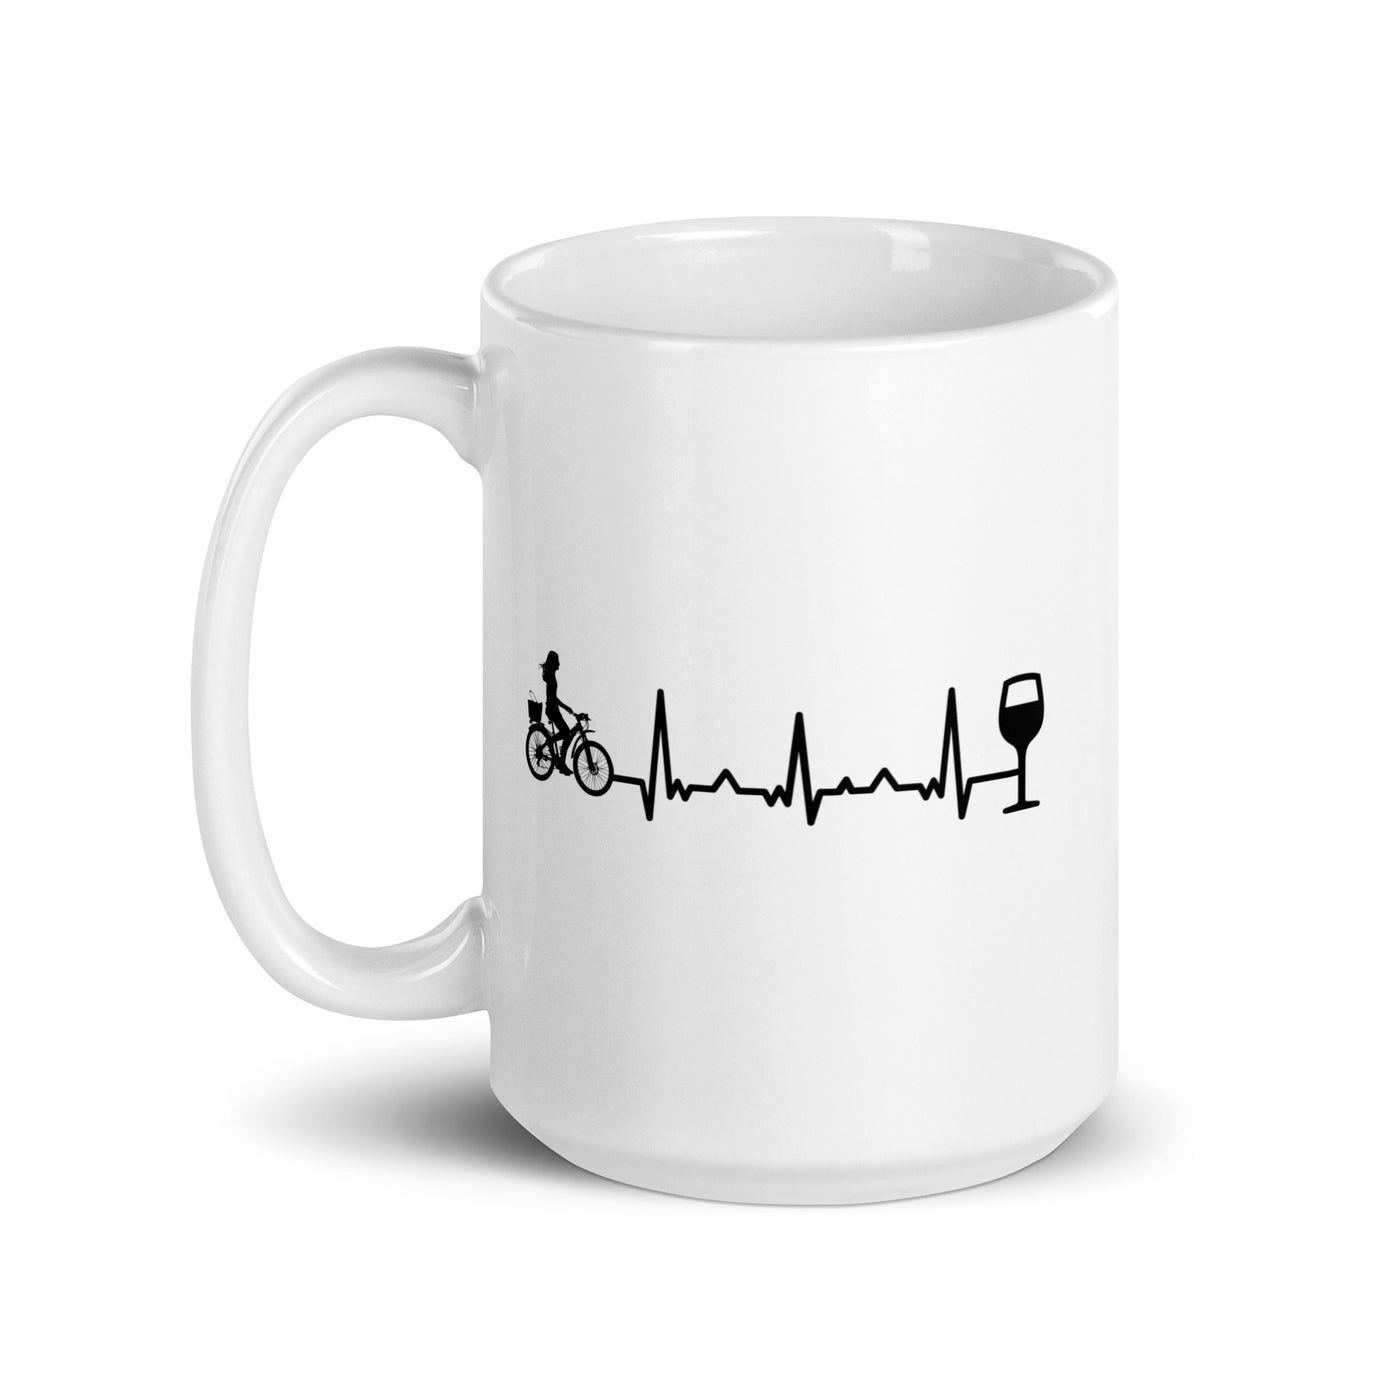 Heartbeat Wine And Cycling - Tasse fahrrad